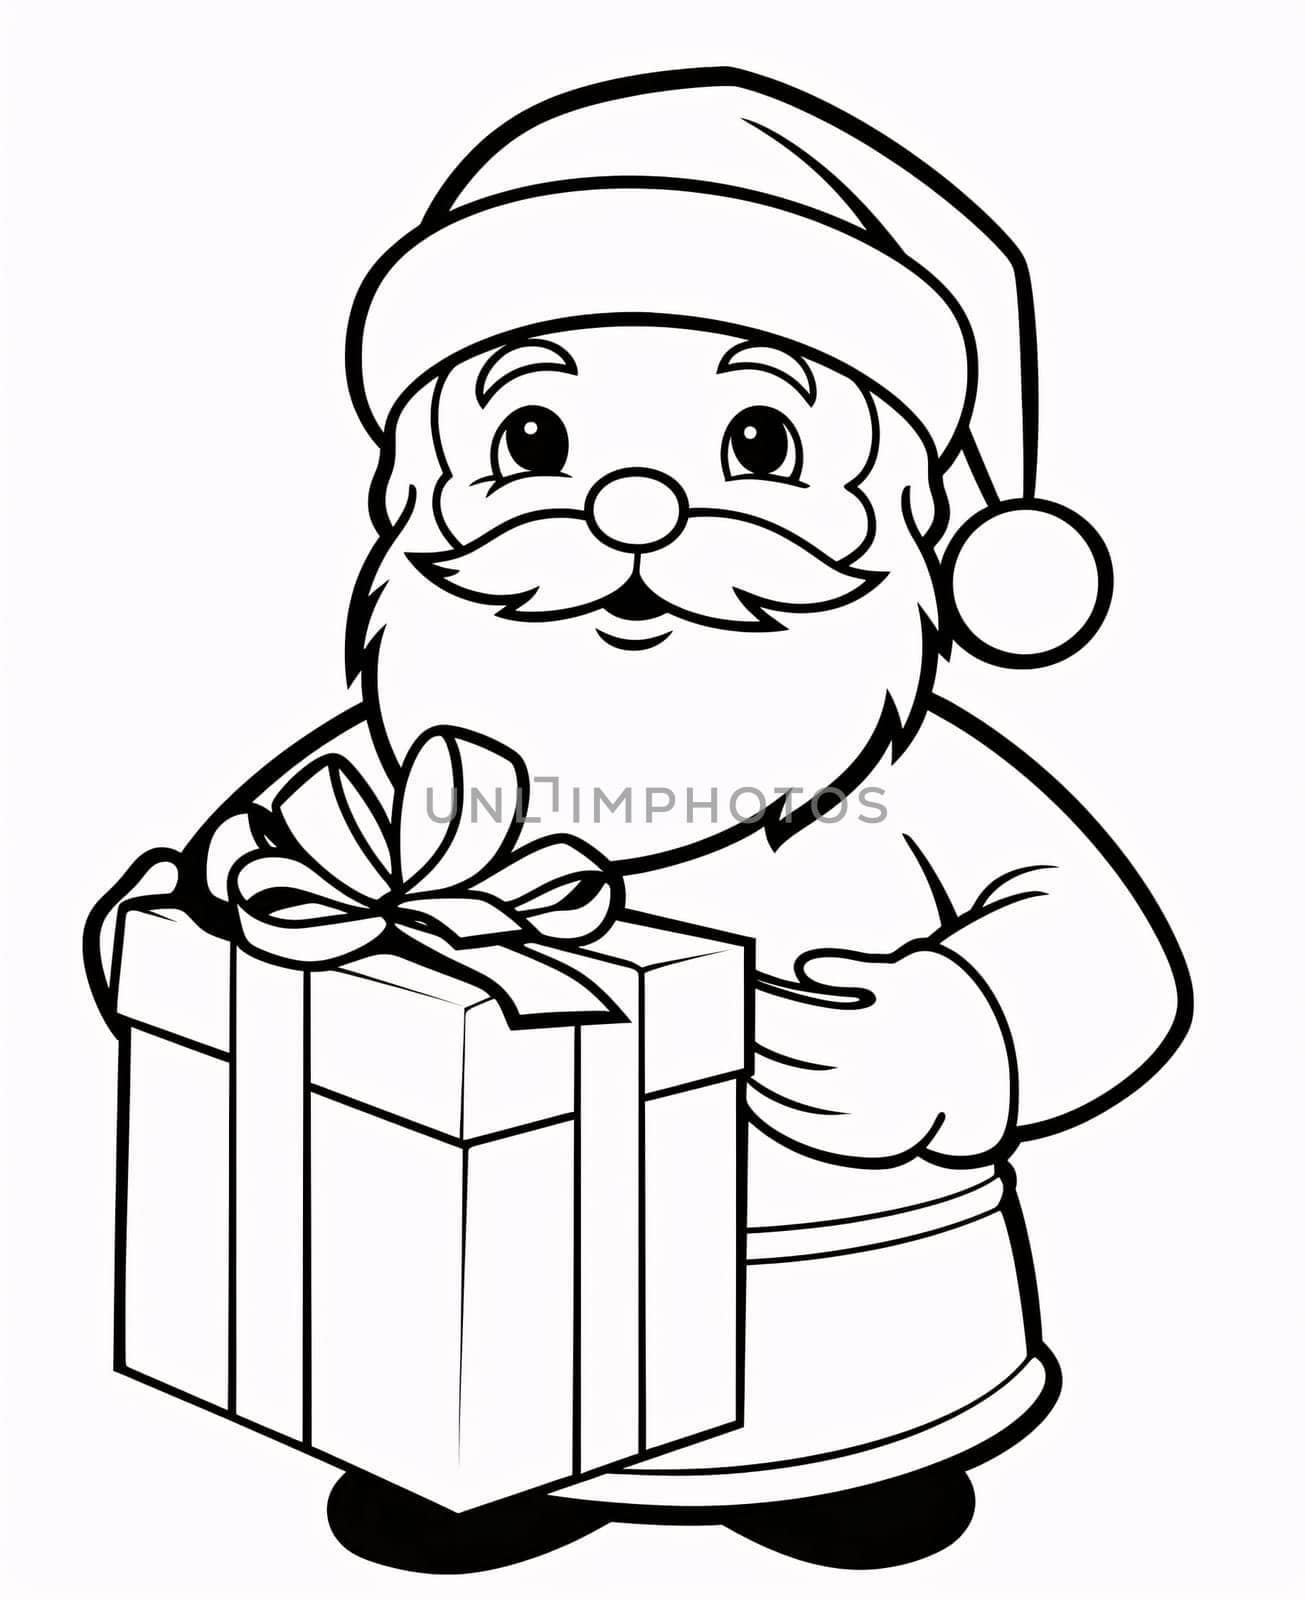 Black and white coloring sheet: Santa Claus with a gift. Gifts as a day symbol of present and love. by ThemesS